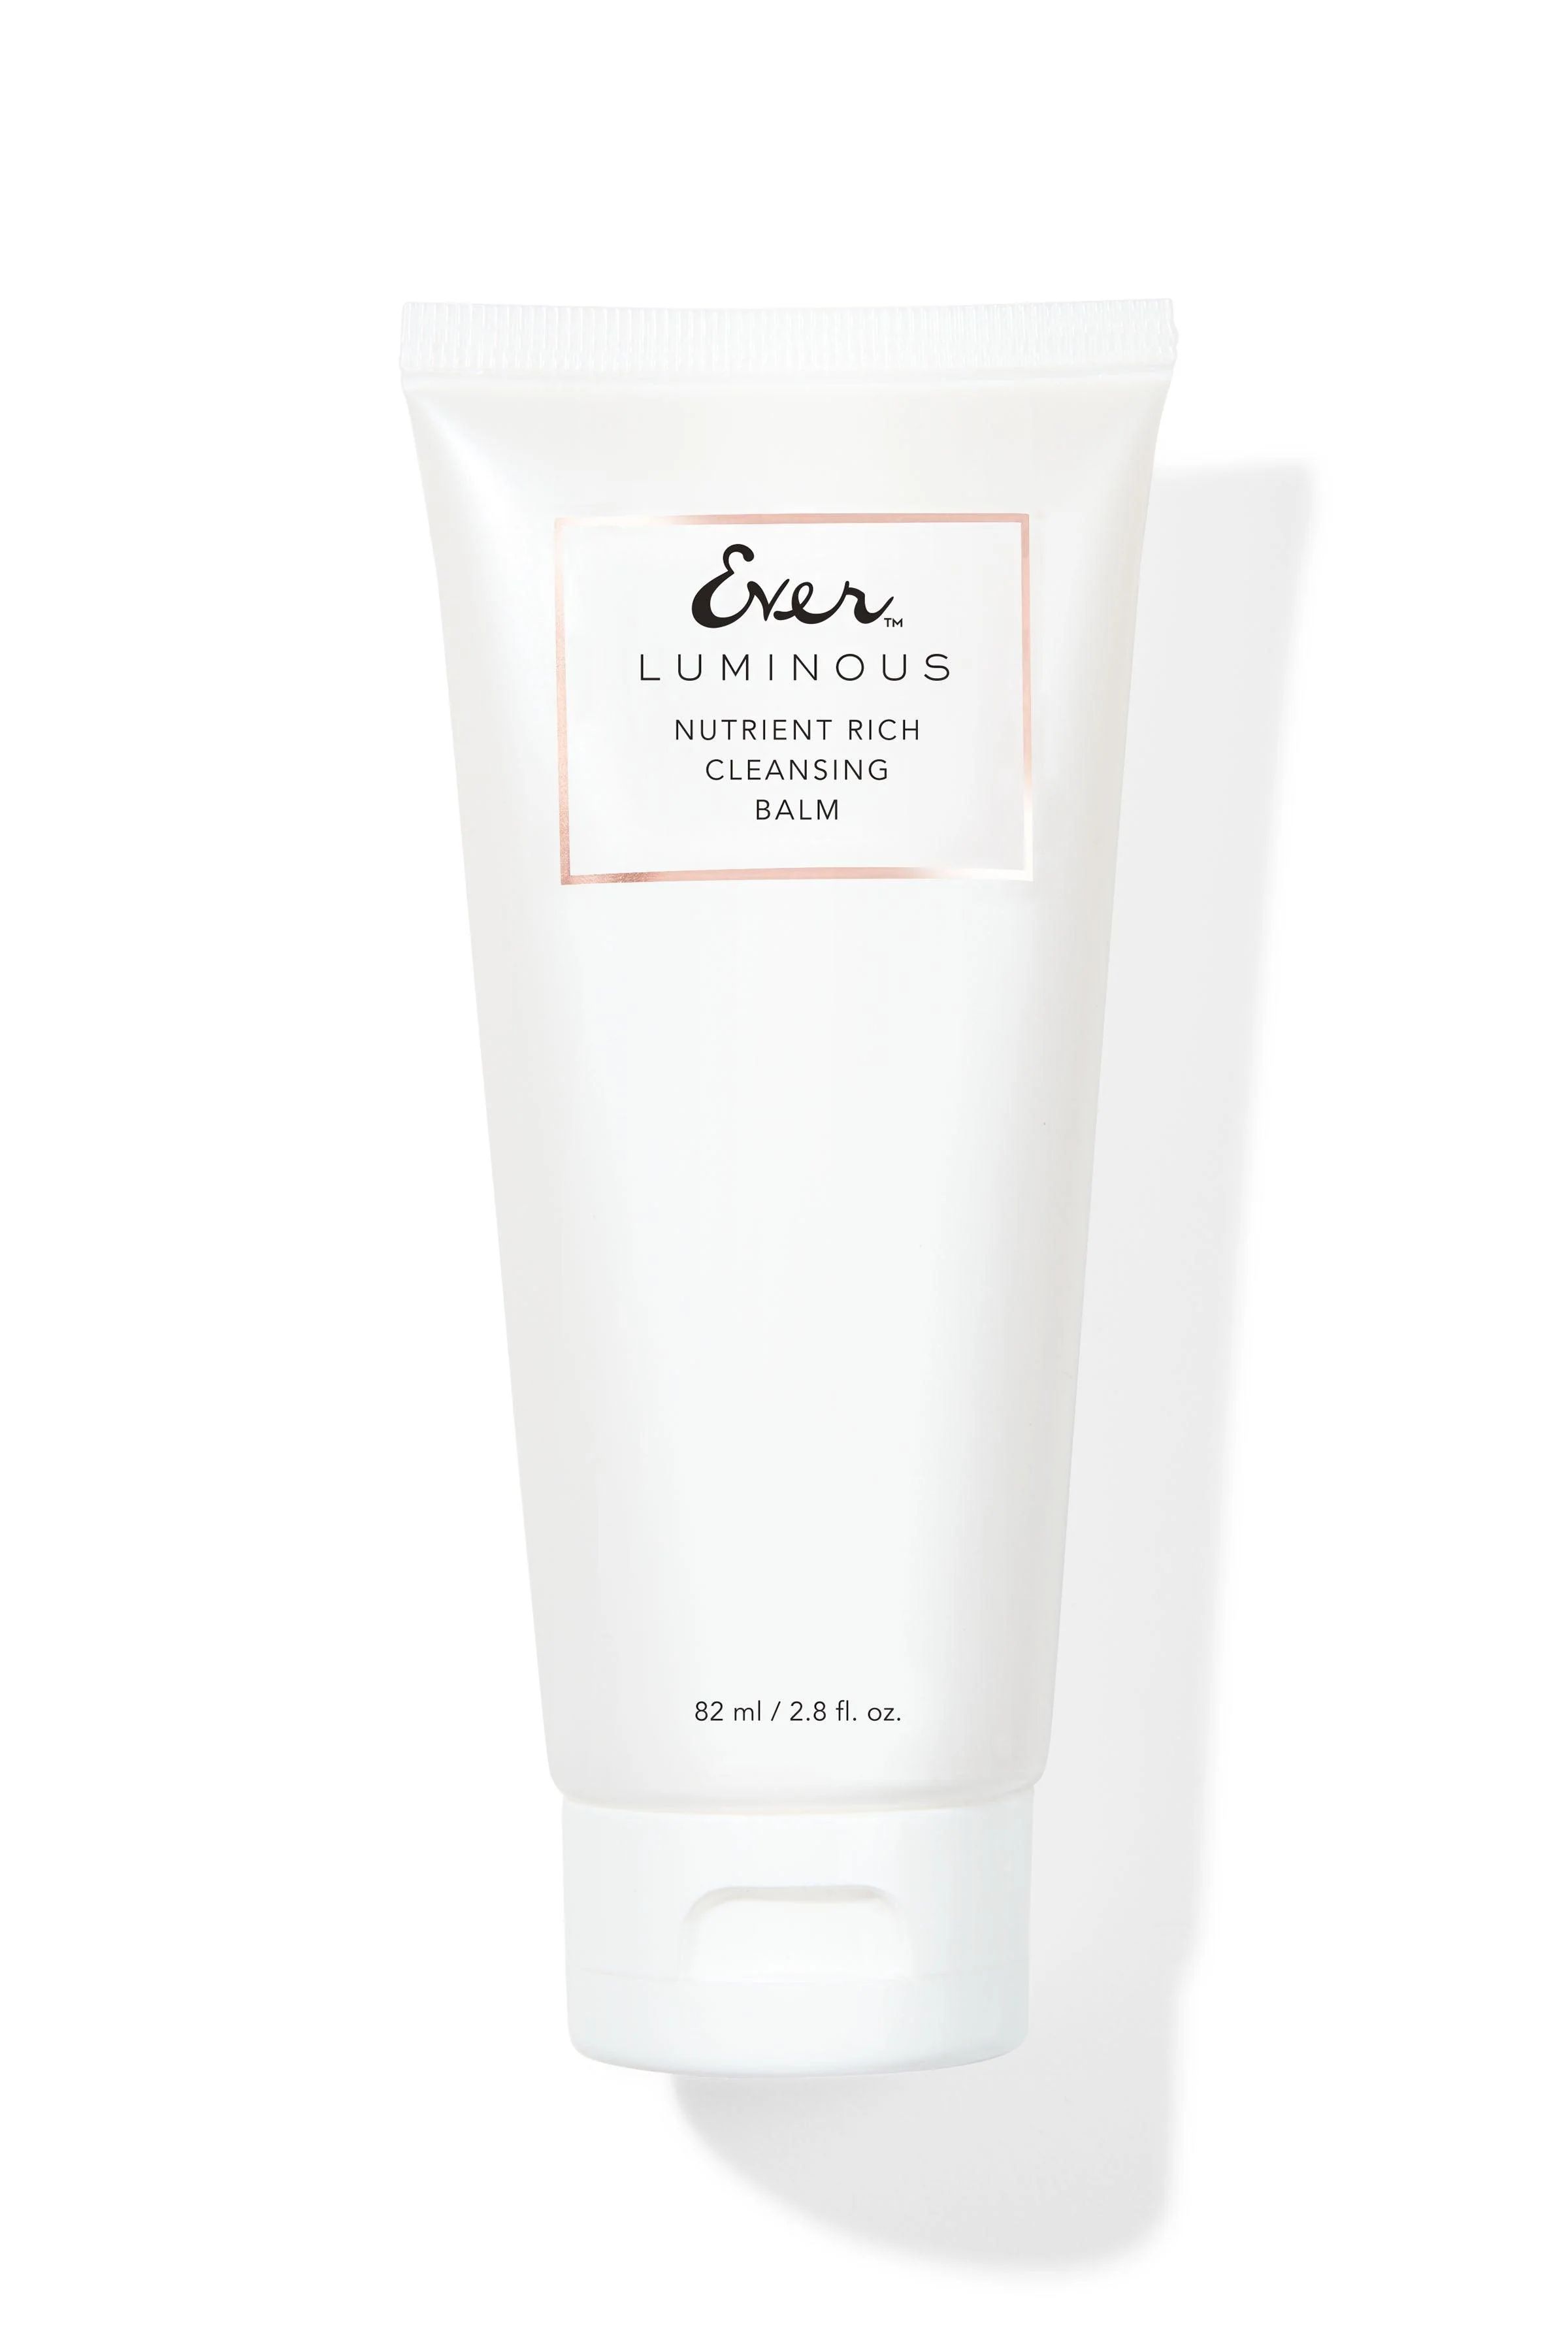 LUMINOUS Nutrient-Rich Cleansing Balm (Dry Skin) | EVER Skincare